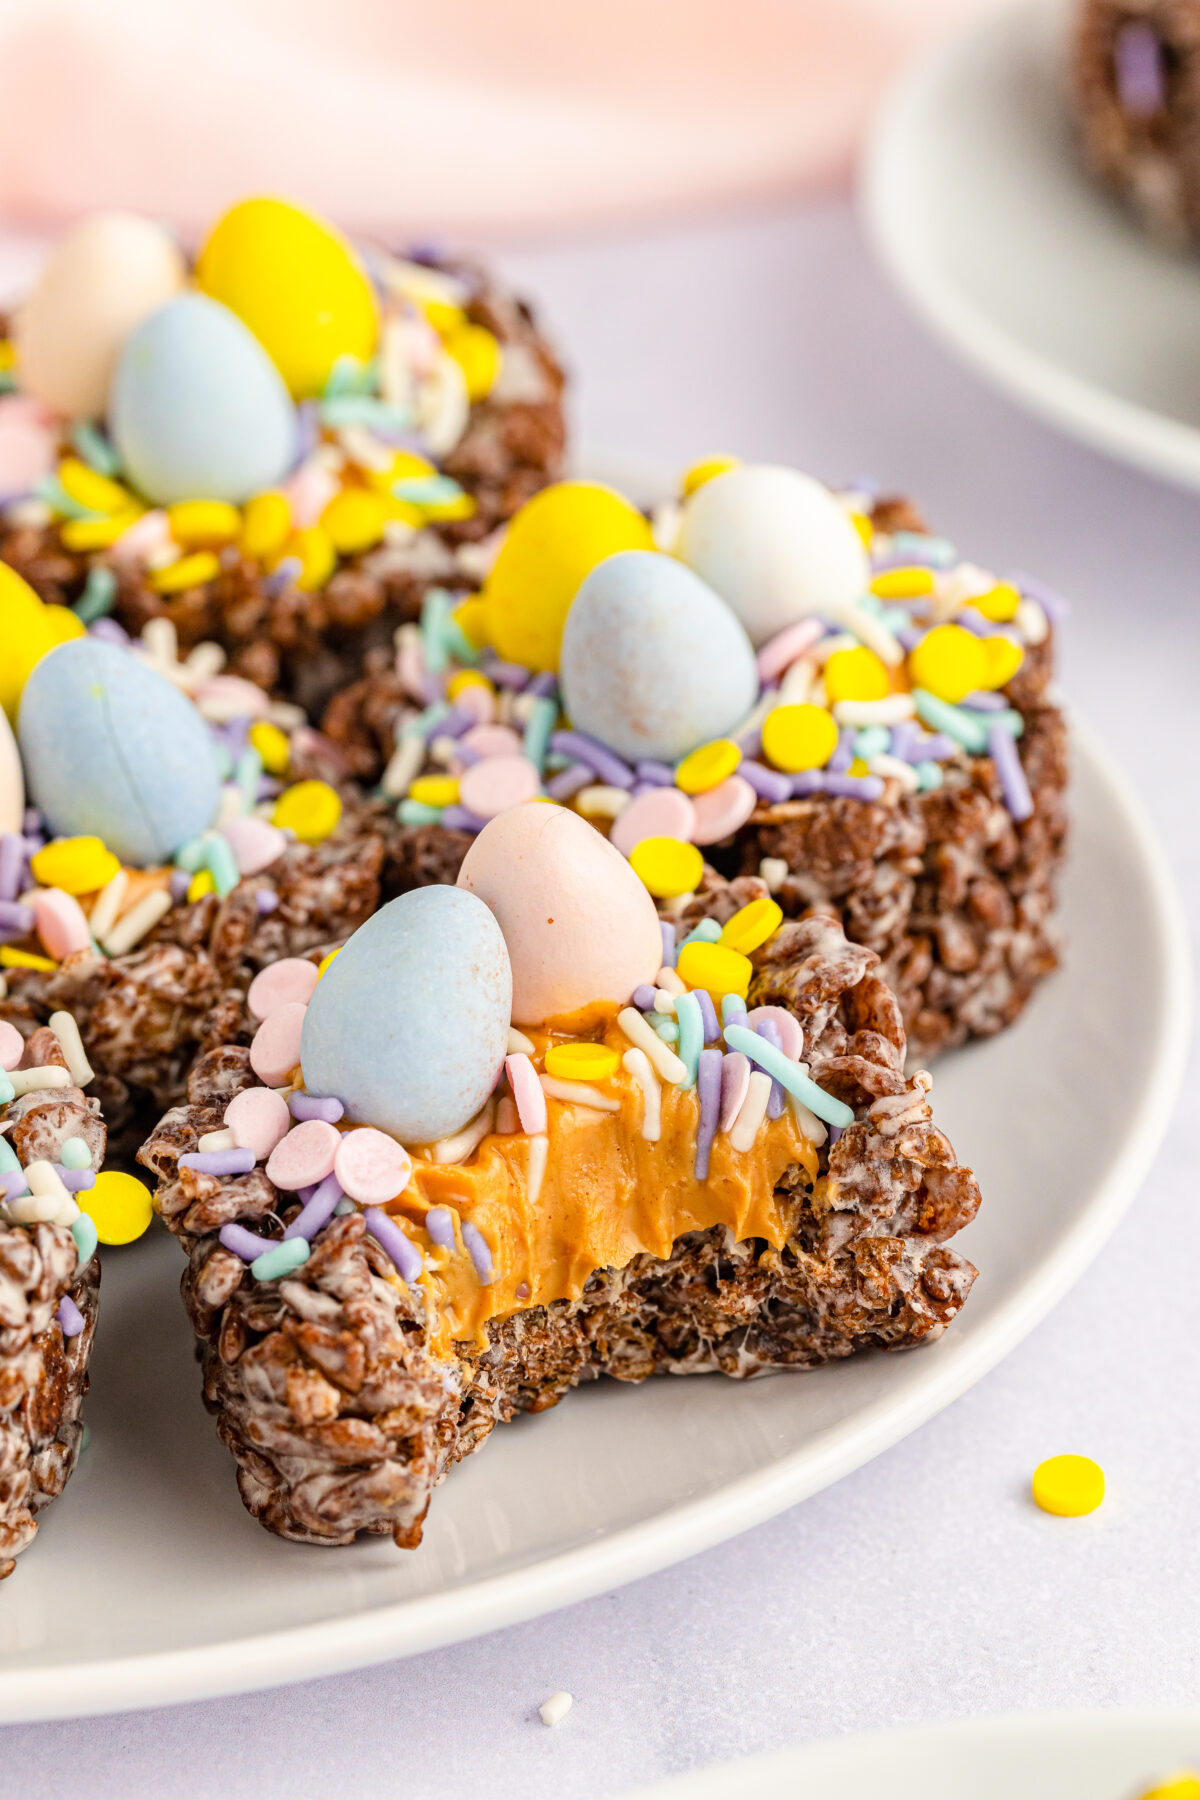 Celebrate this Easter with these Cocoa Pebbles Easter Nests filled with creamy peanut butter and topped off with chocolate eggs.